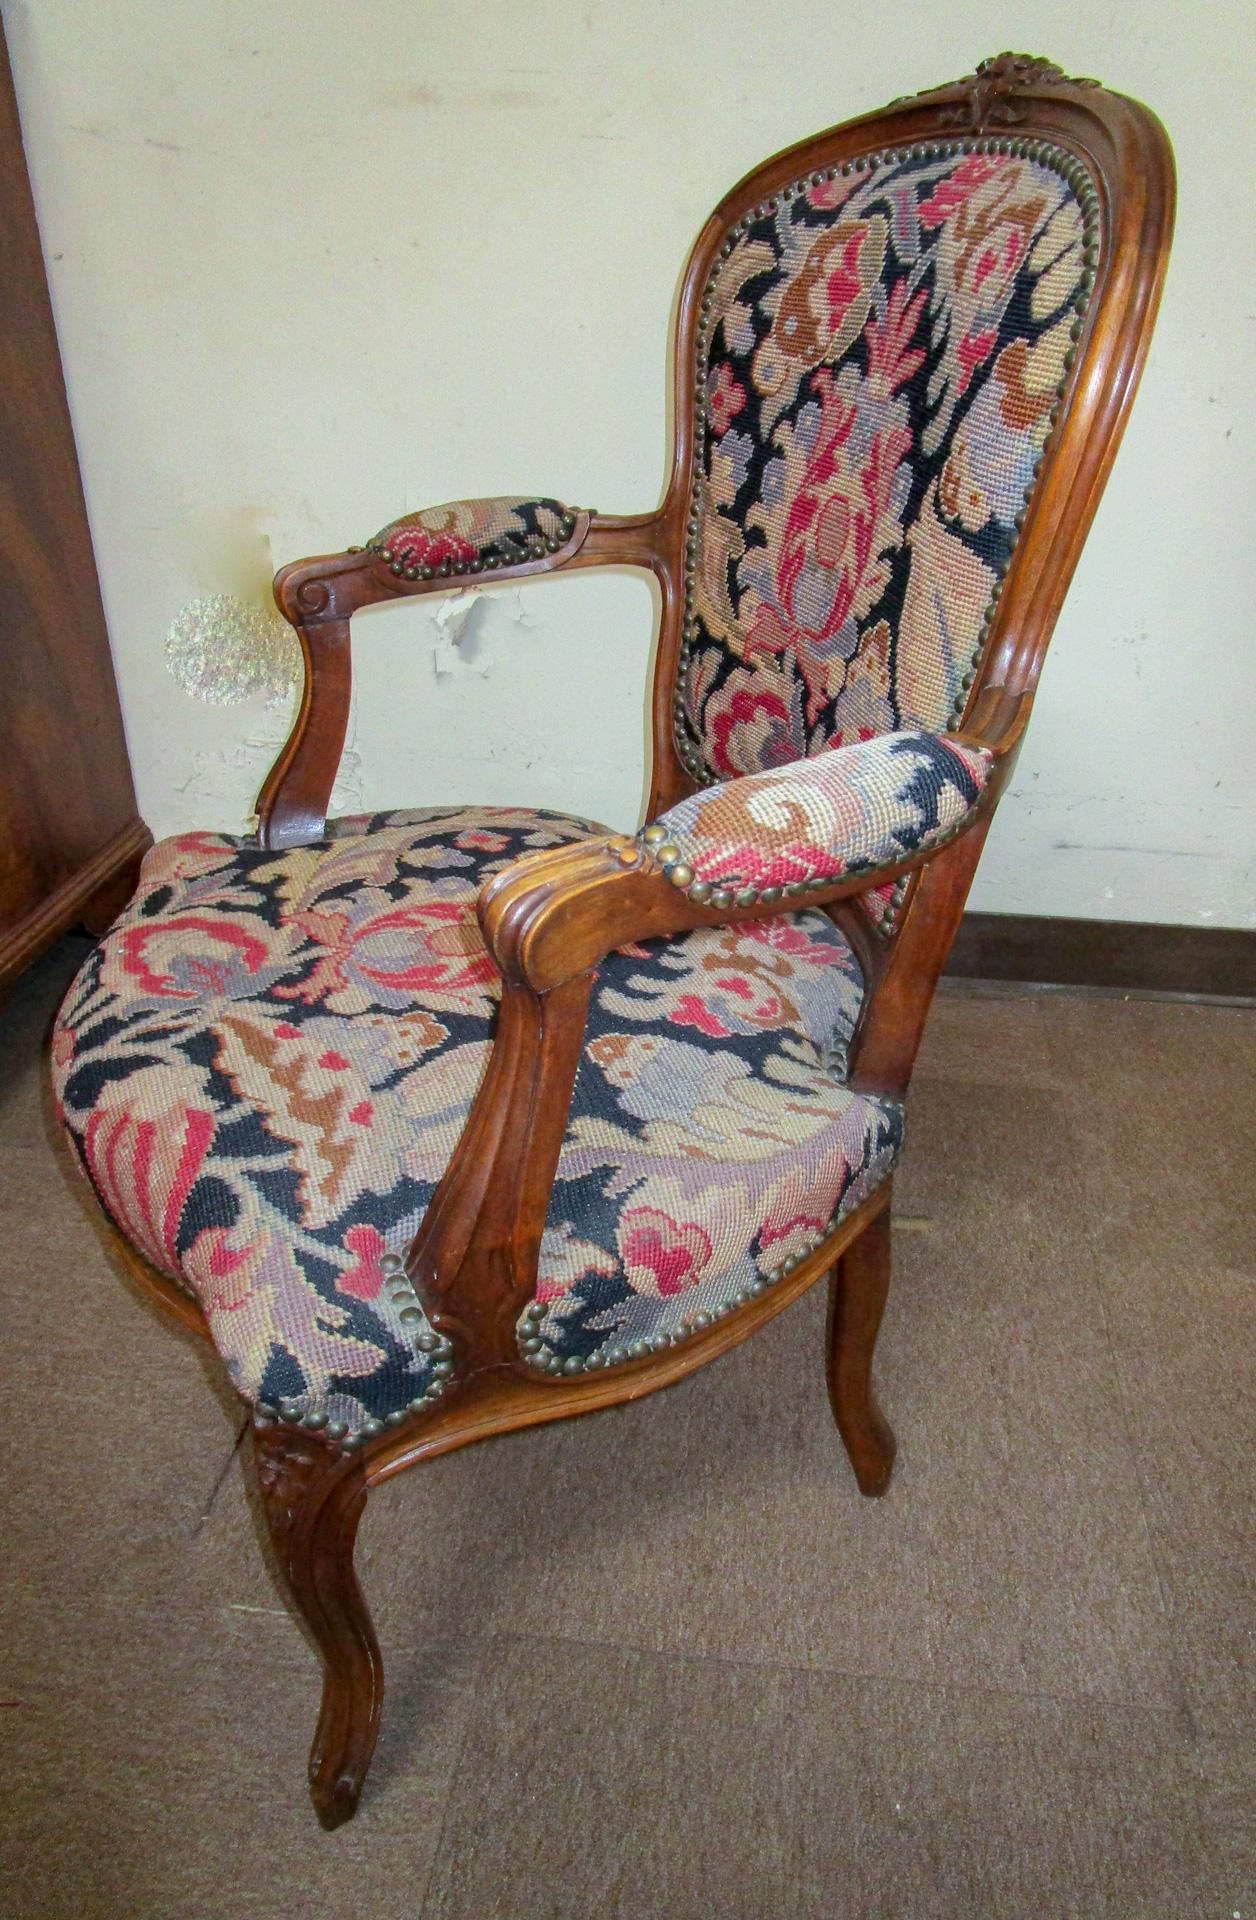 Late 19th Century 19thc Louis XVI Style Carved Walnut Fauteuils with Needlepoint Upholstery For Sale